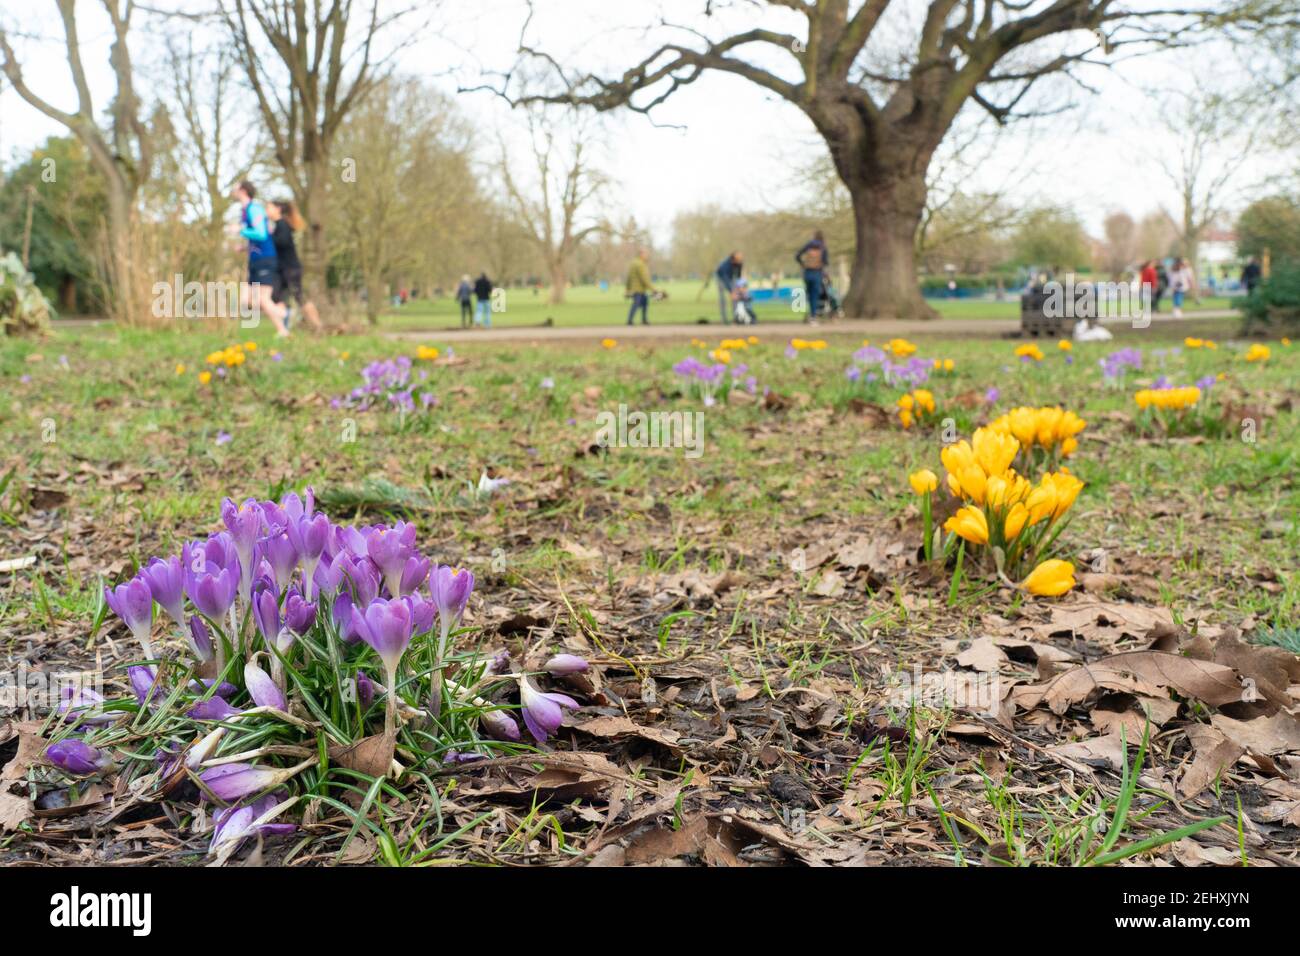 London, UK. 20th Feb, 2021. Wild purple crocuses in Lammas Park in Ealing on an early spring day in London. Photo date: Saturday, February 20, 2021. Photo: Richard Gray/Alamy Live News Stock Photo